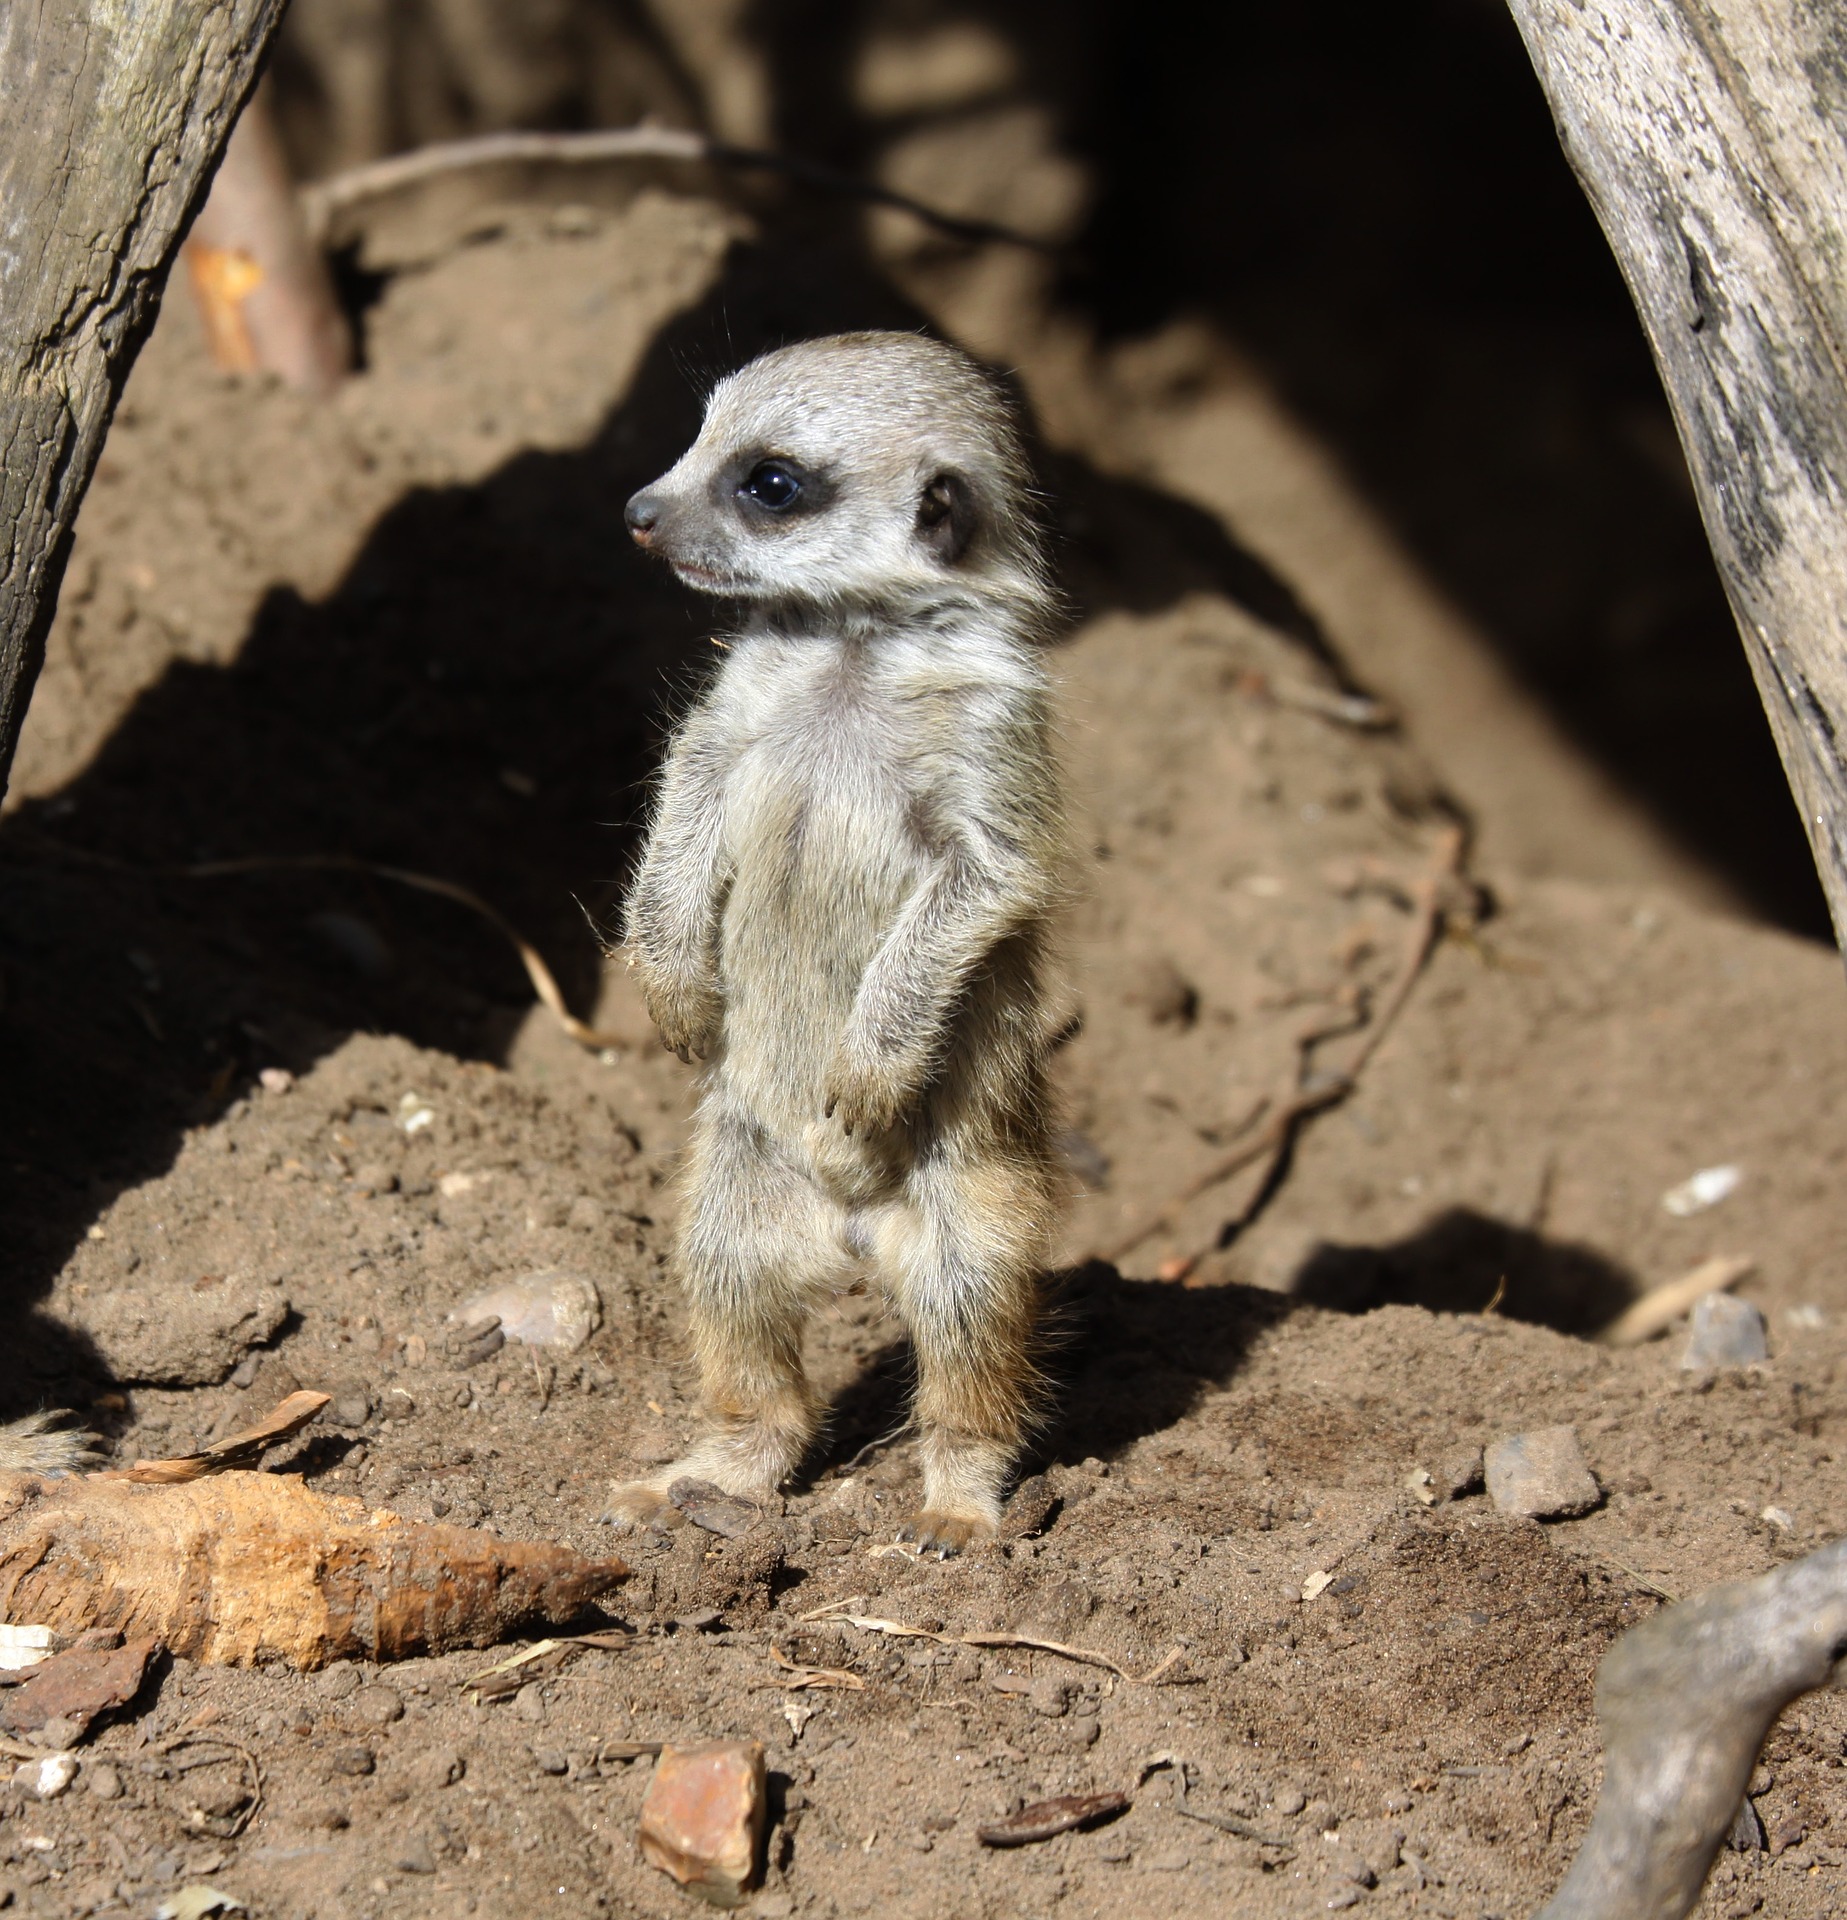 The Meerkat. Want to know some cool facts and see the pictures?